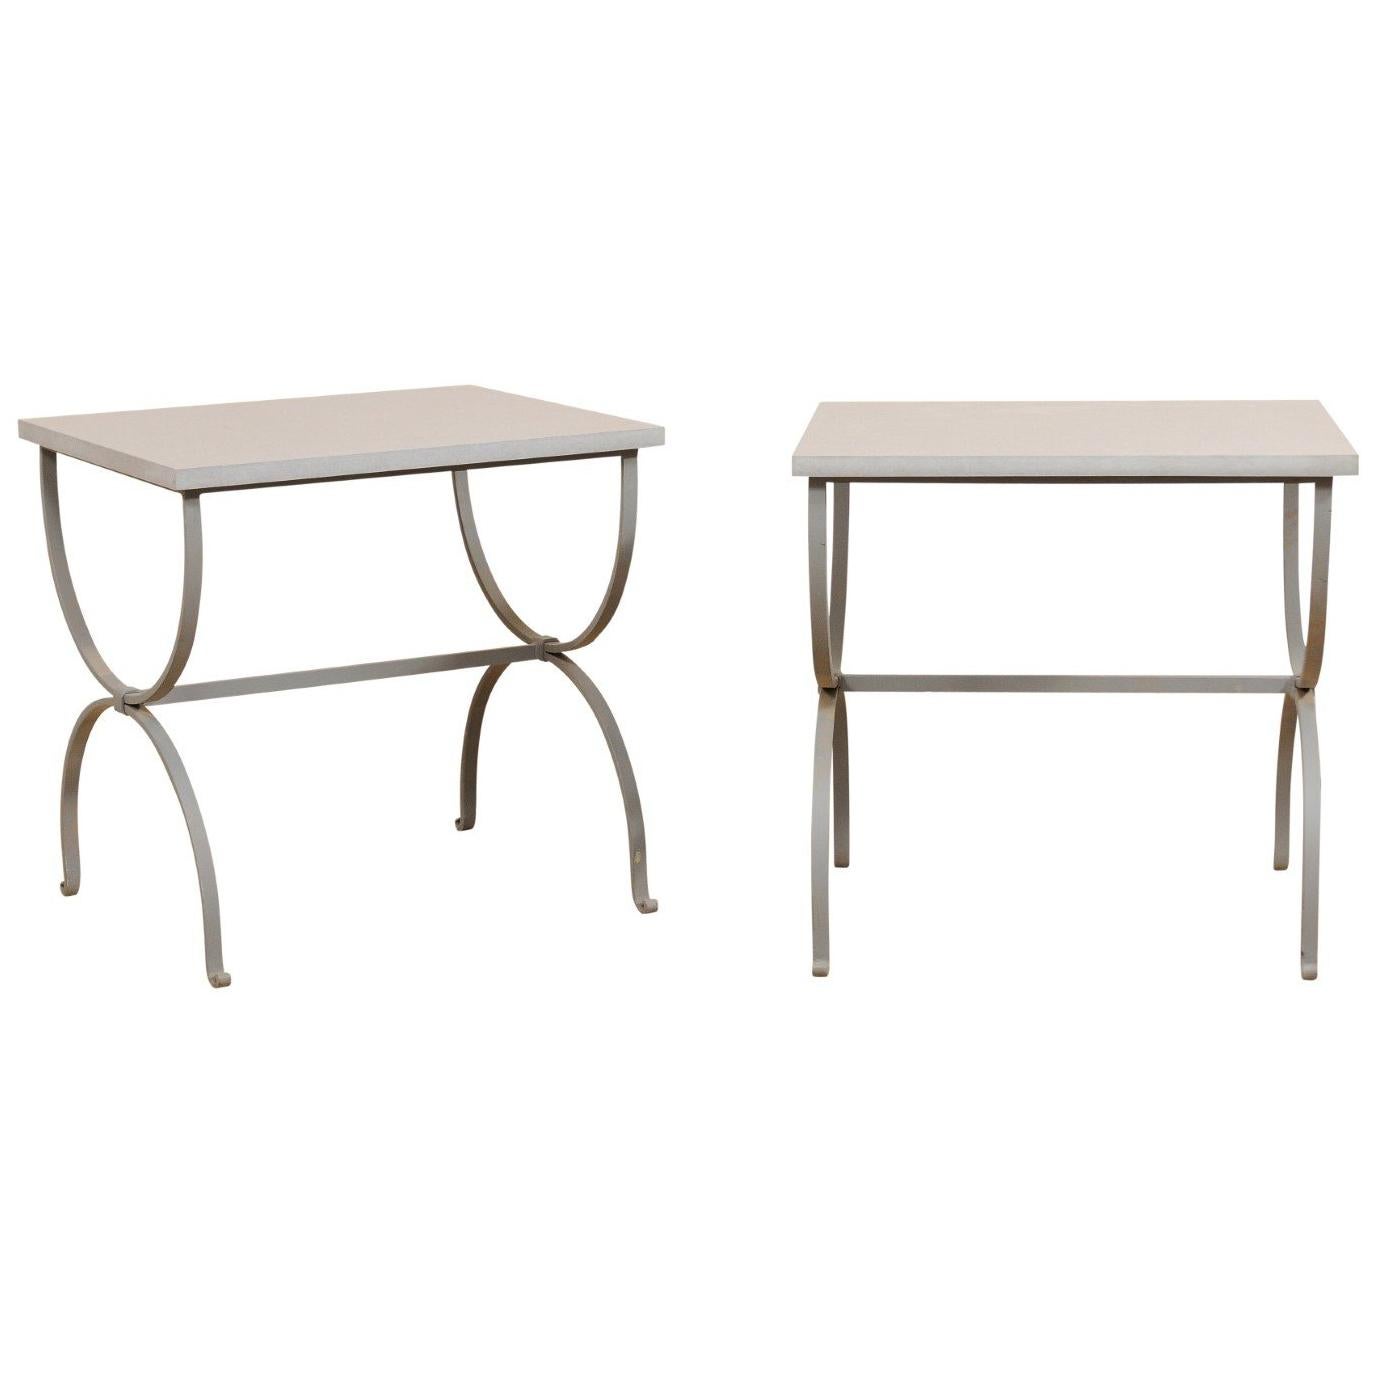 Pair of American Custom Iron Occasional Curule Tables with Stone Tops